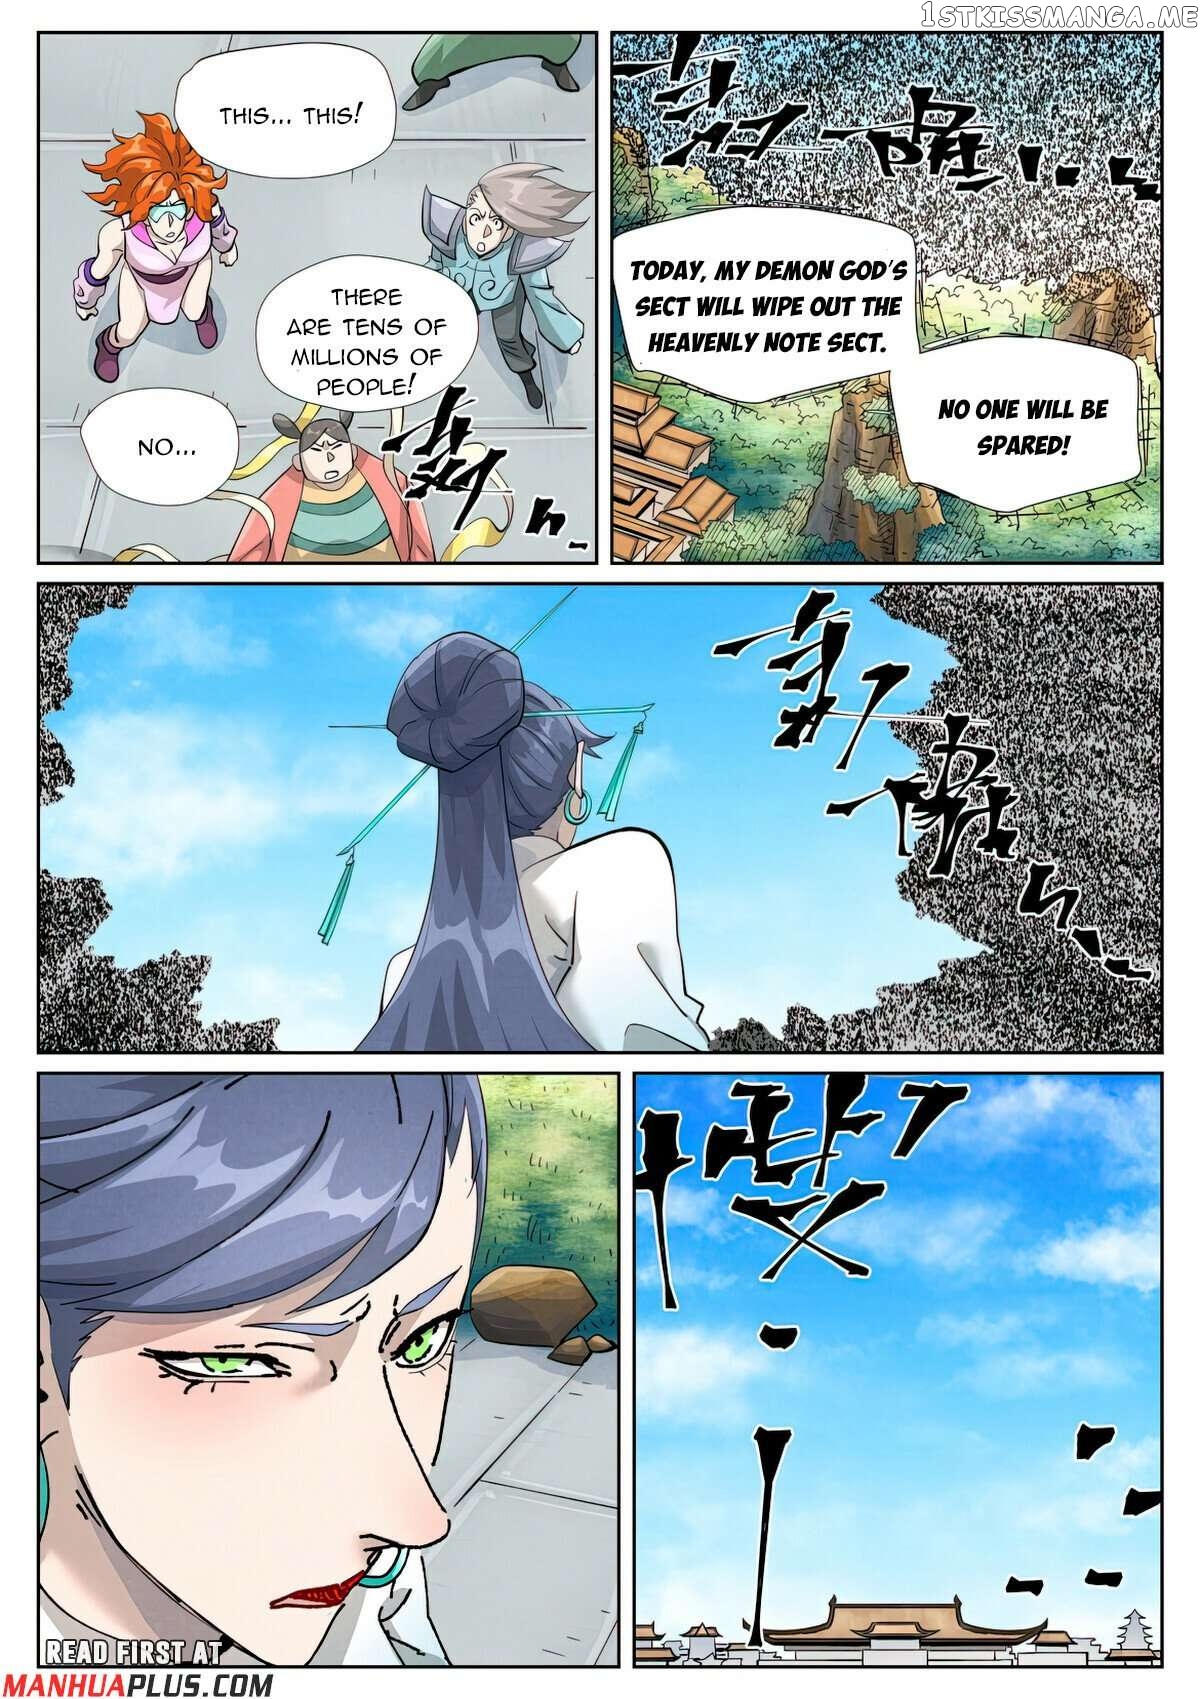 Tales of Demons and Gods Manhua Chapter 438.6 - Page 6